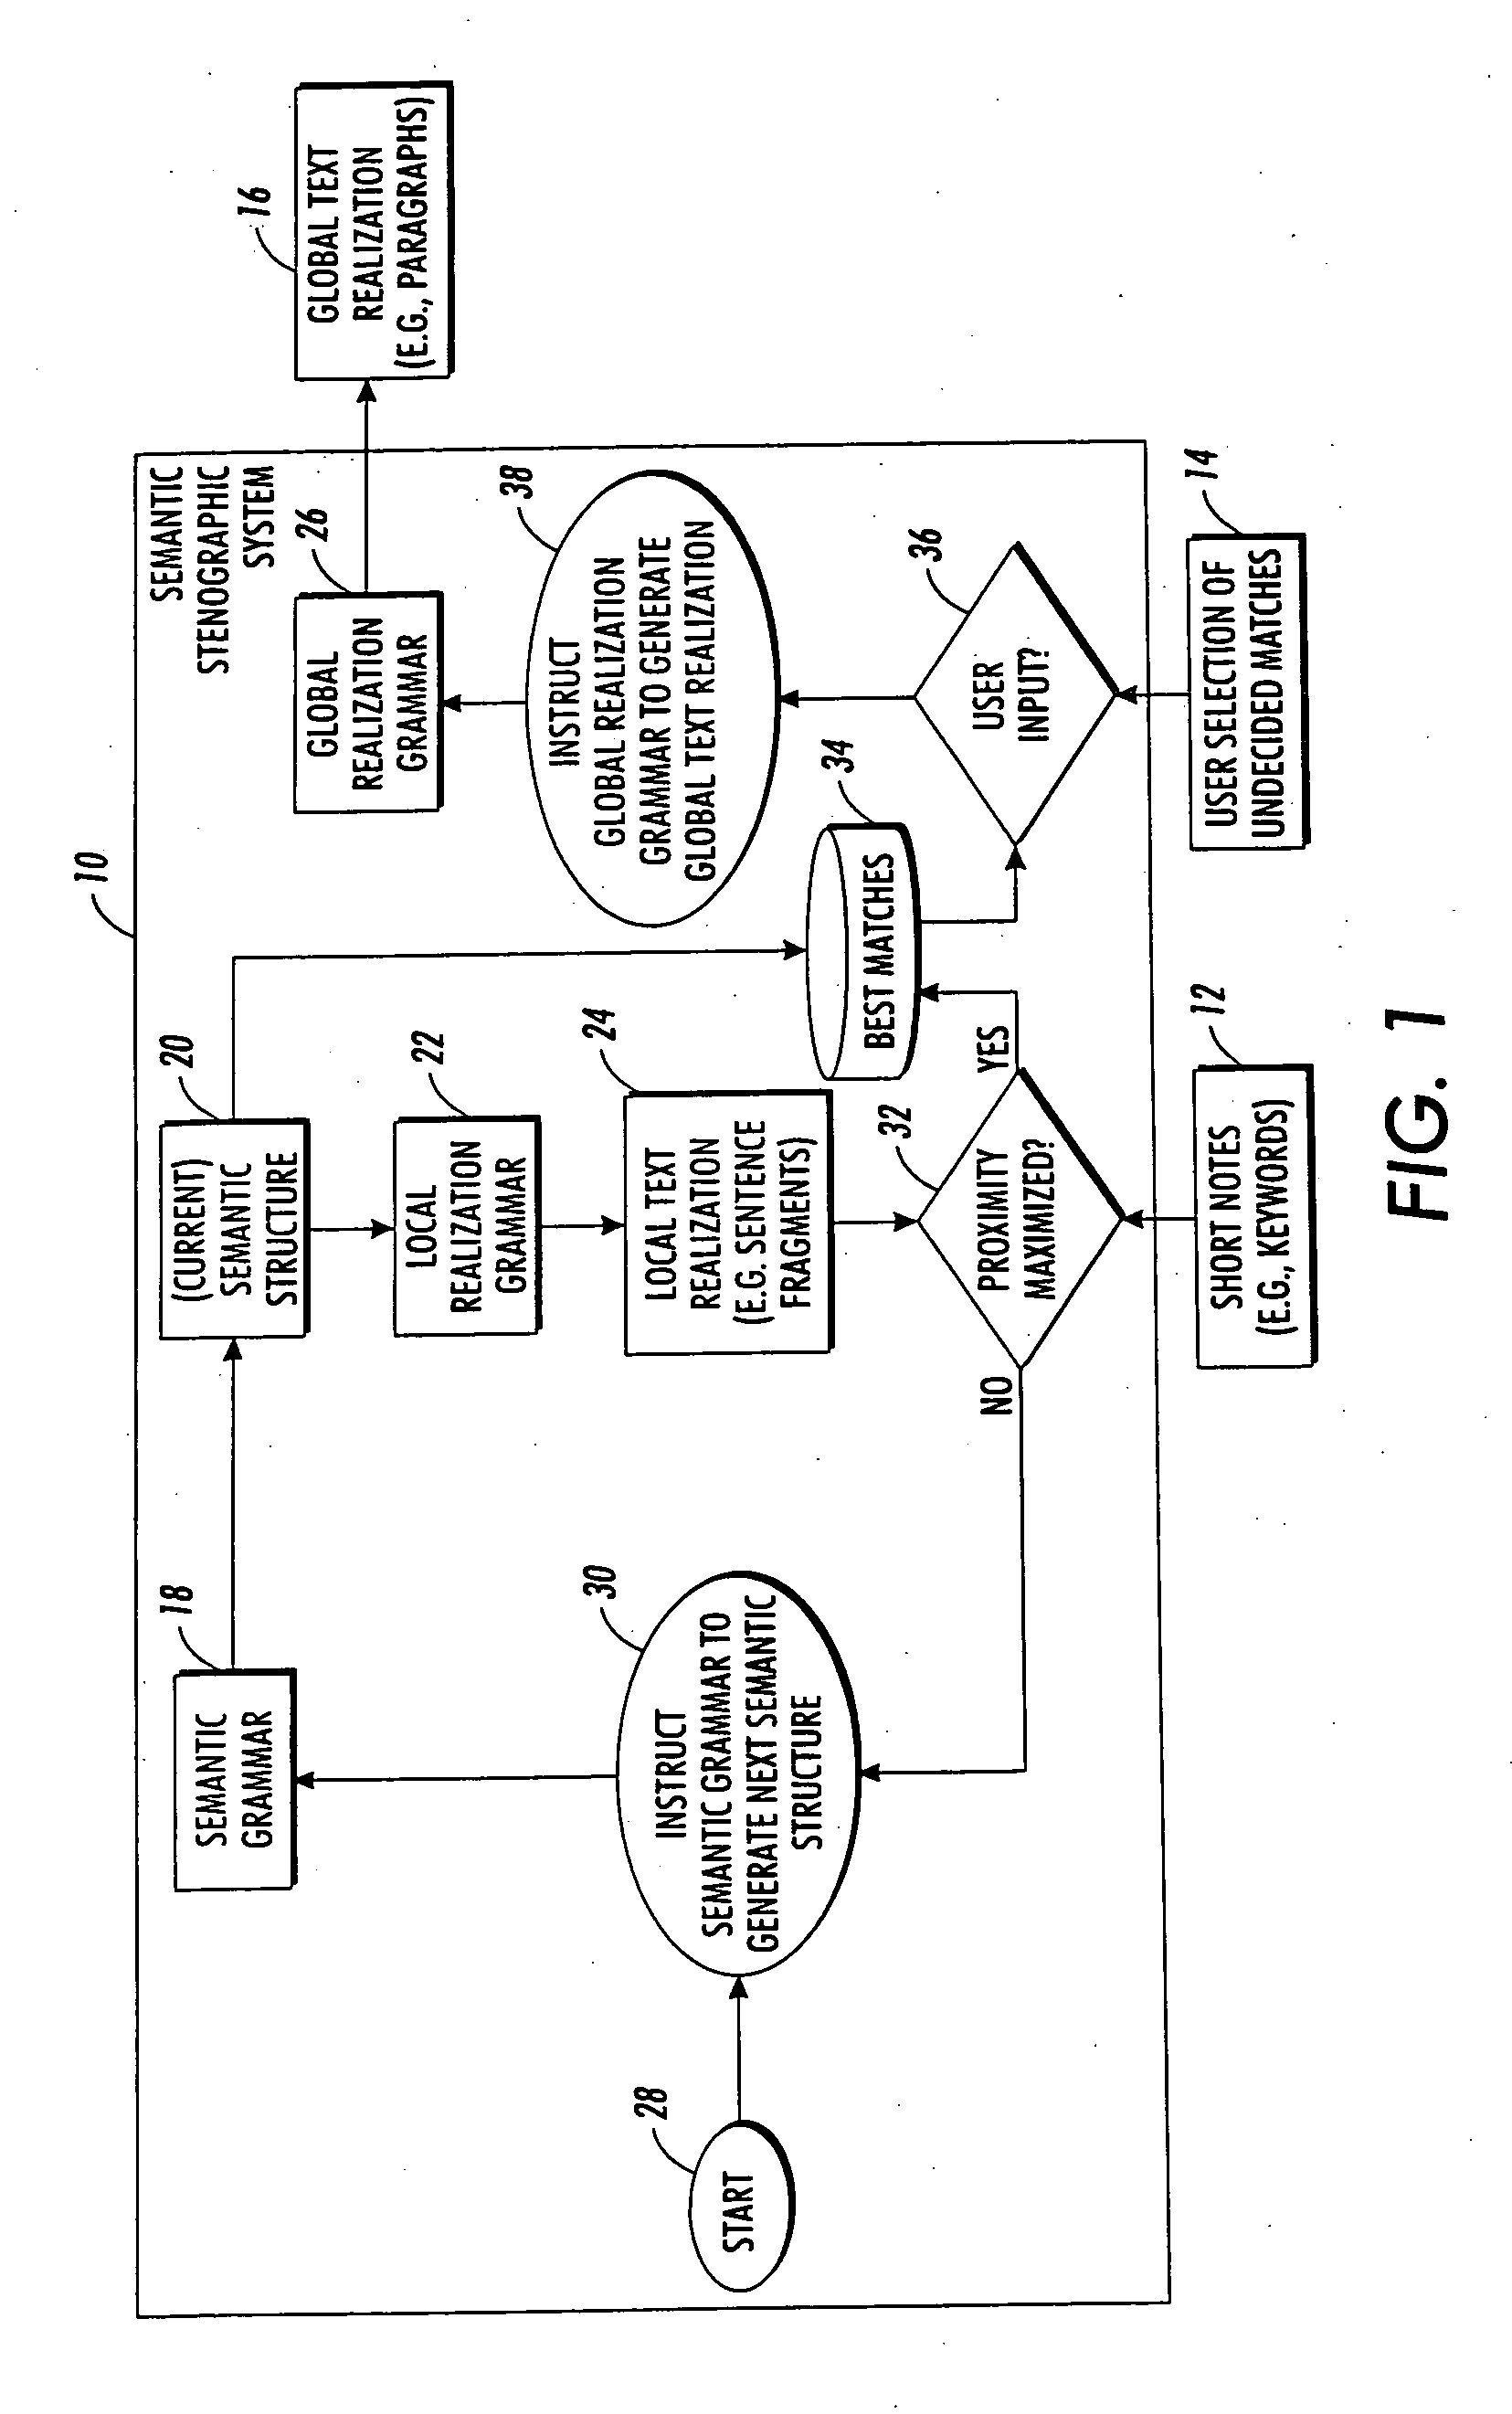 Systems and methods for semantic stenography